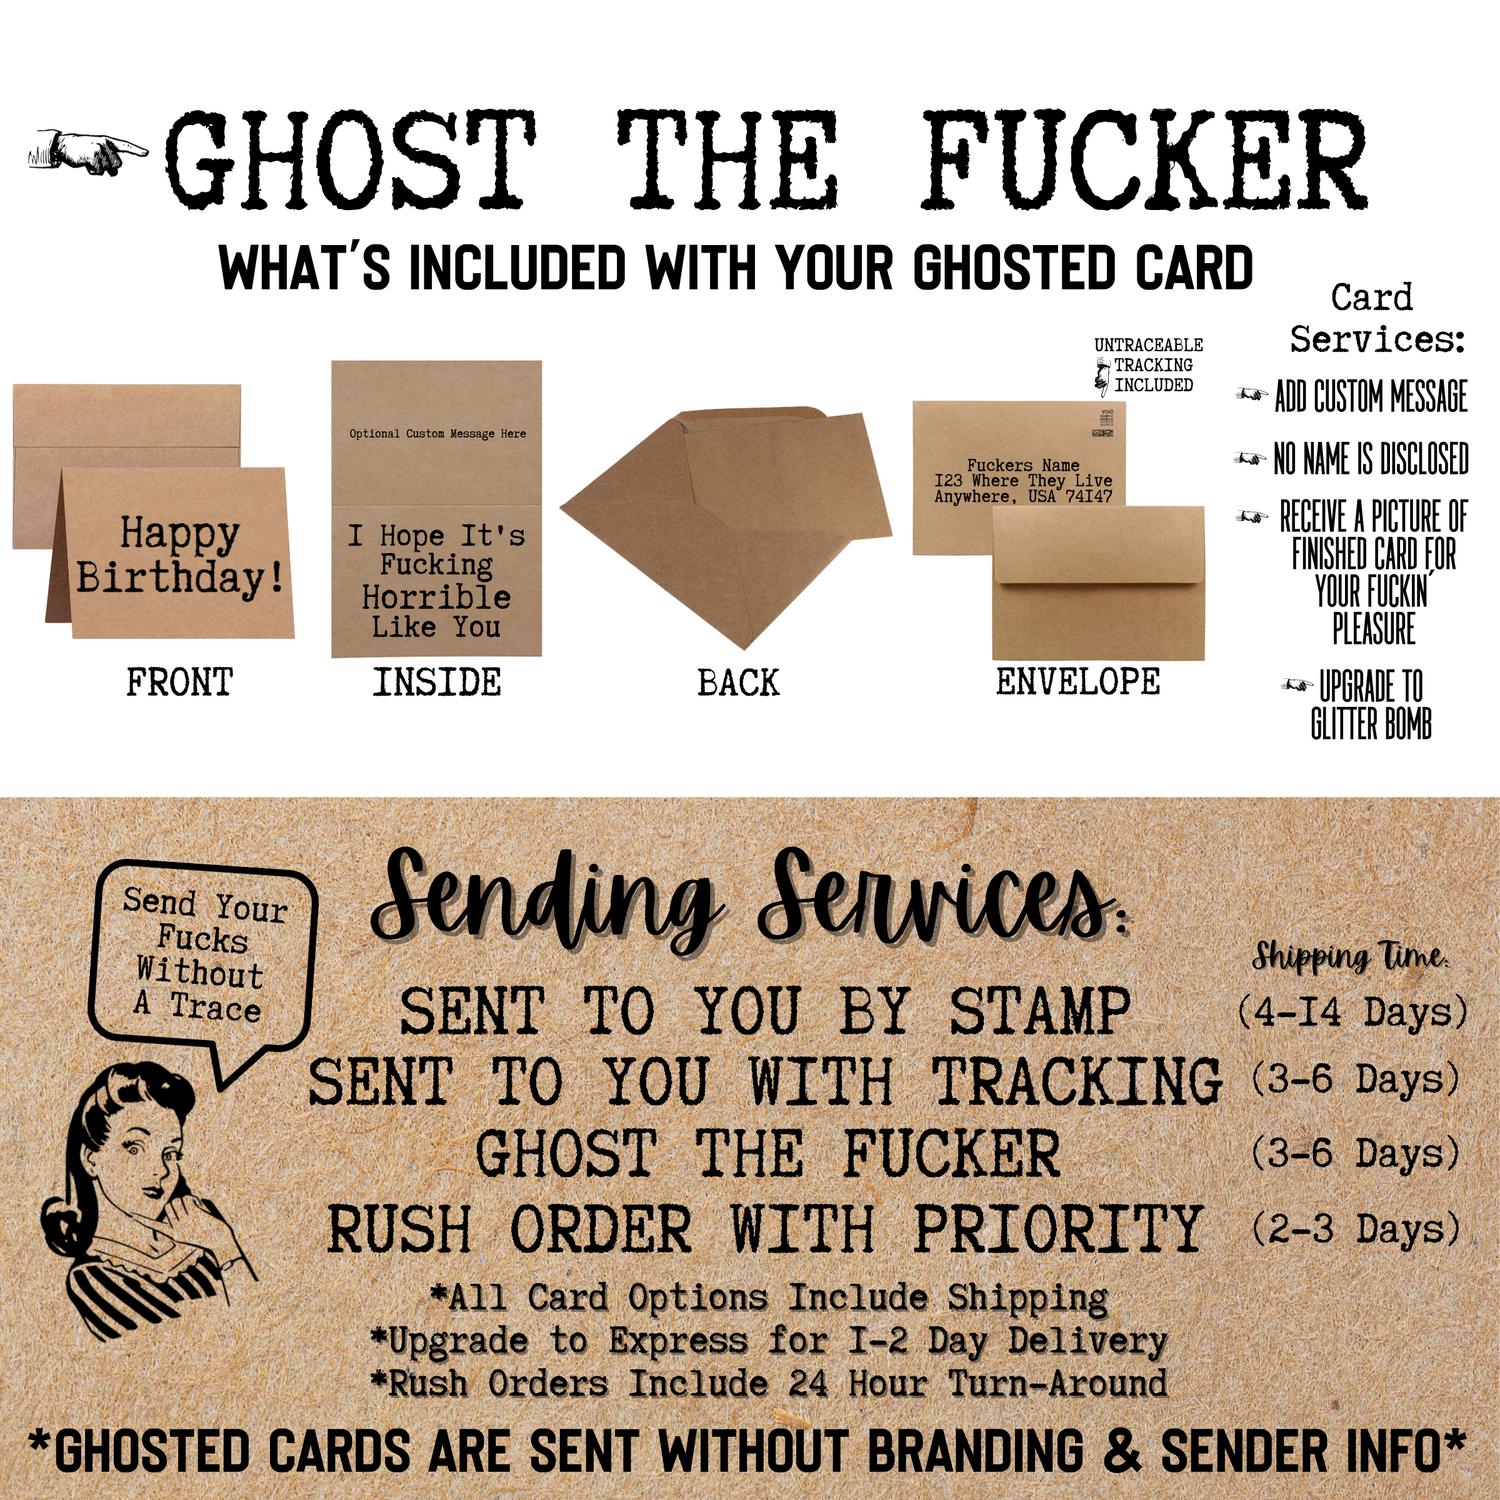 Send a Greeting Card by Ghosting the Fucker which includes no branding and no sender info 